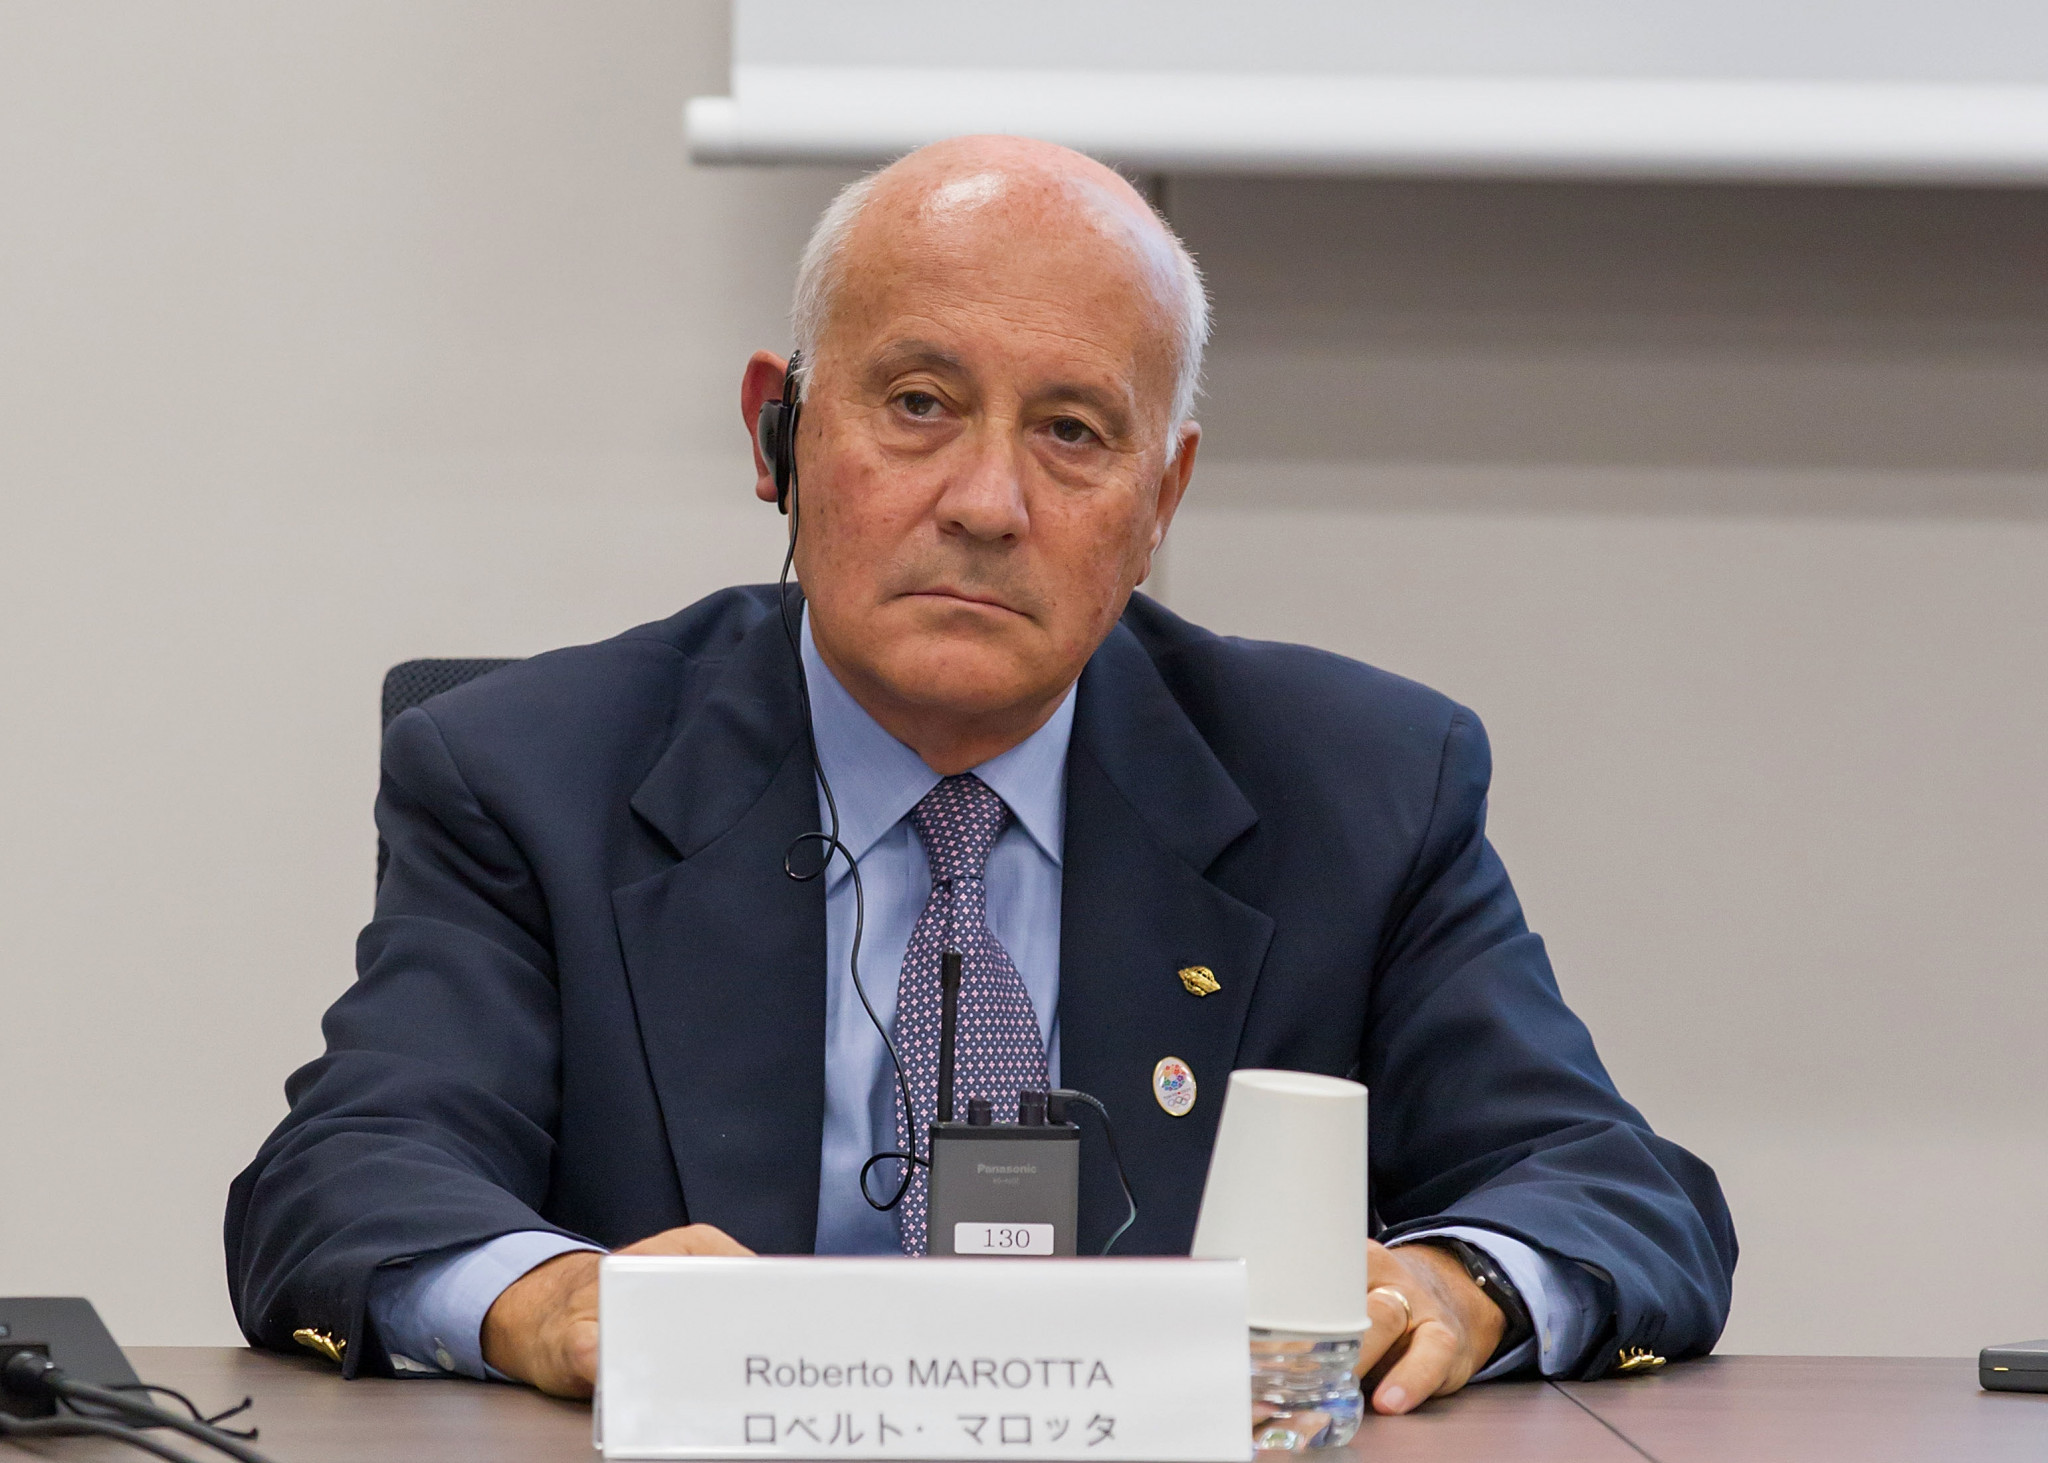 Roberto Marotta has been re-elected secretary general of World Skate ©Getty Images